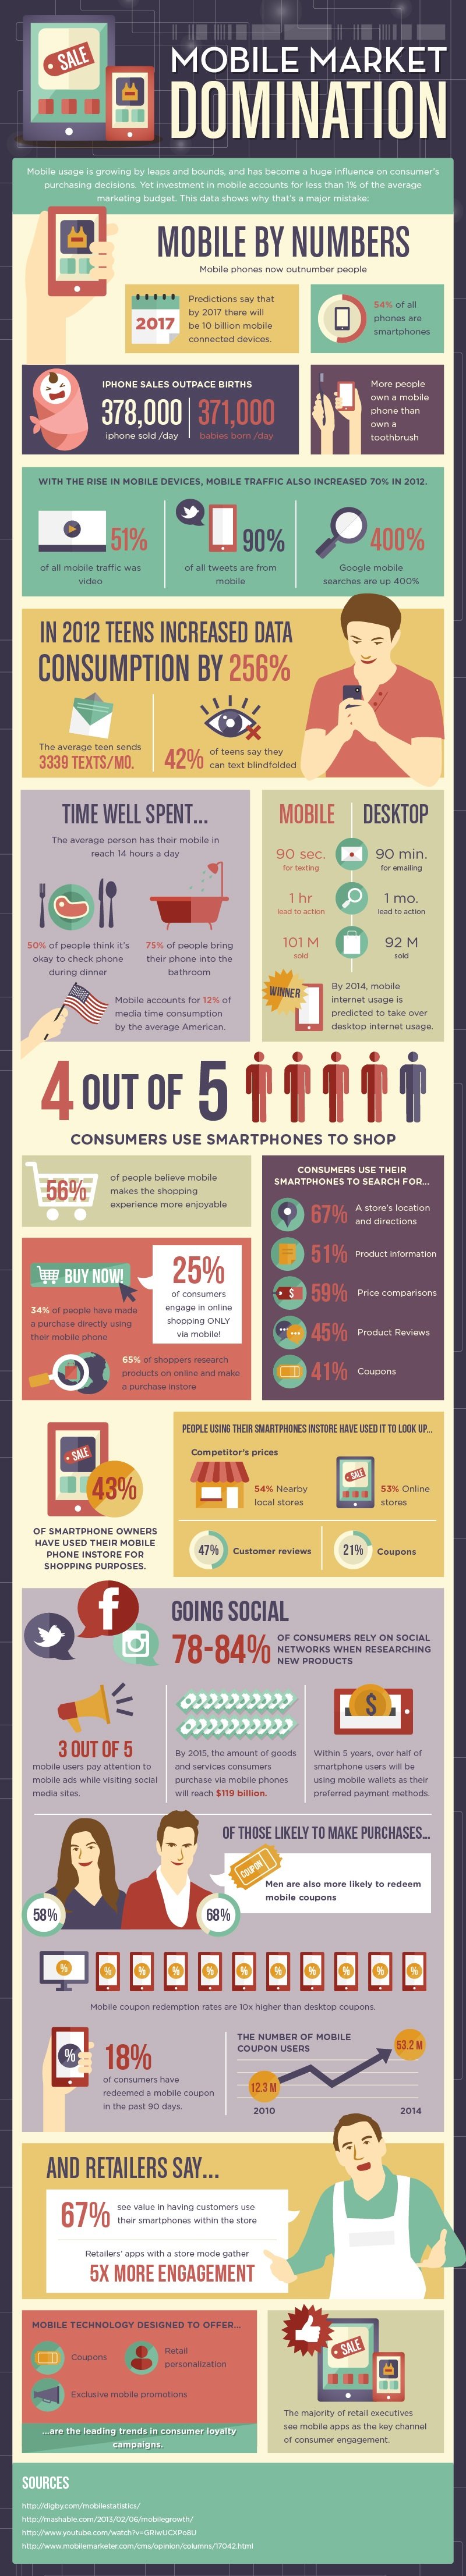 Do You Market on Mobile? You’d Better Look at These Statistics